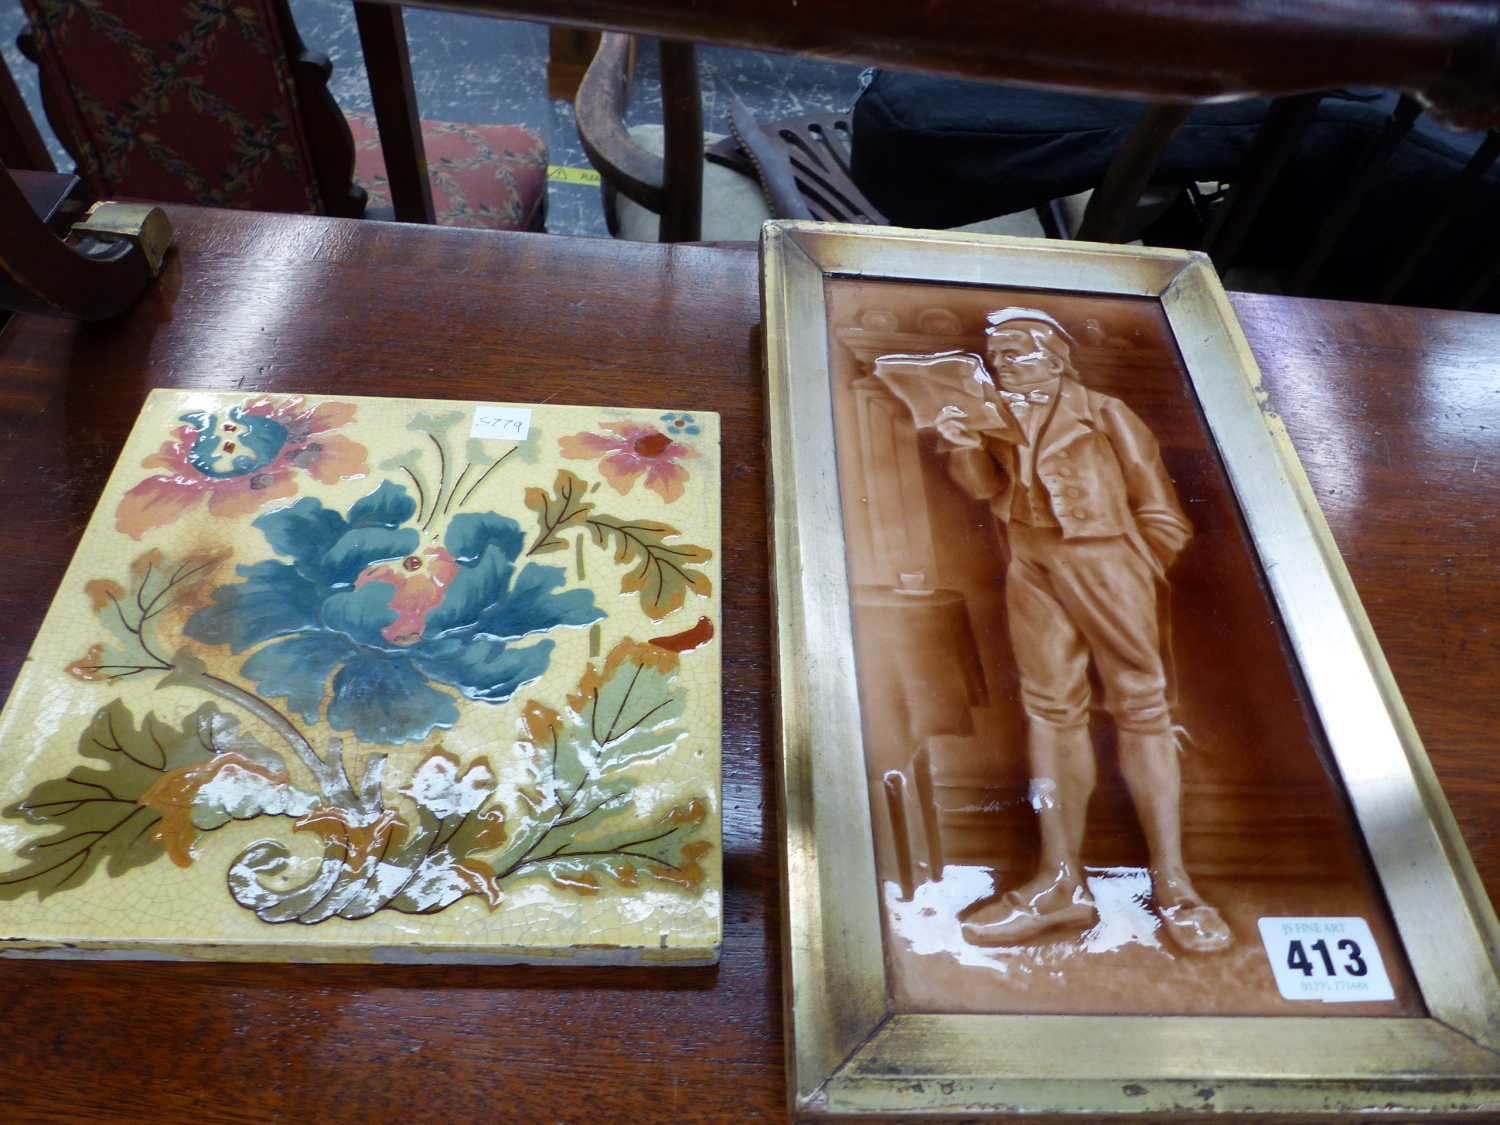 AN ANTIQUE PORCELAIN PANEL DEPICTING A DICKENSIAN CHARACTER, AND ONE FURTHER TILE.